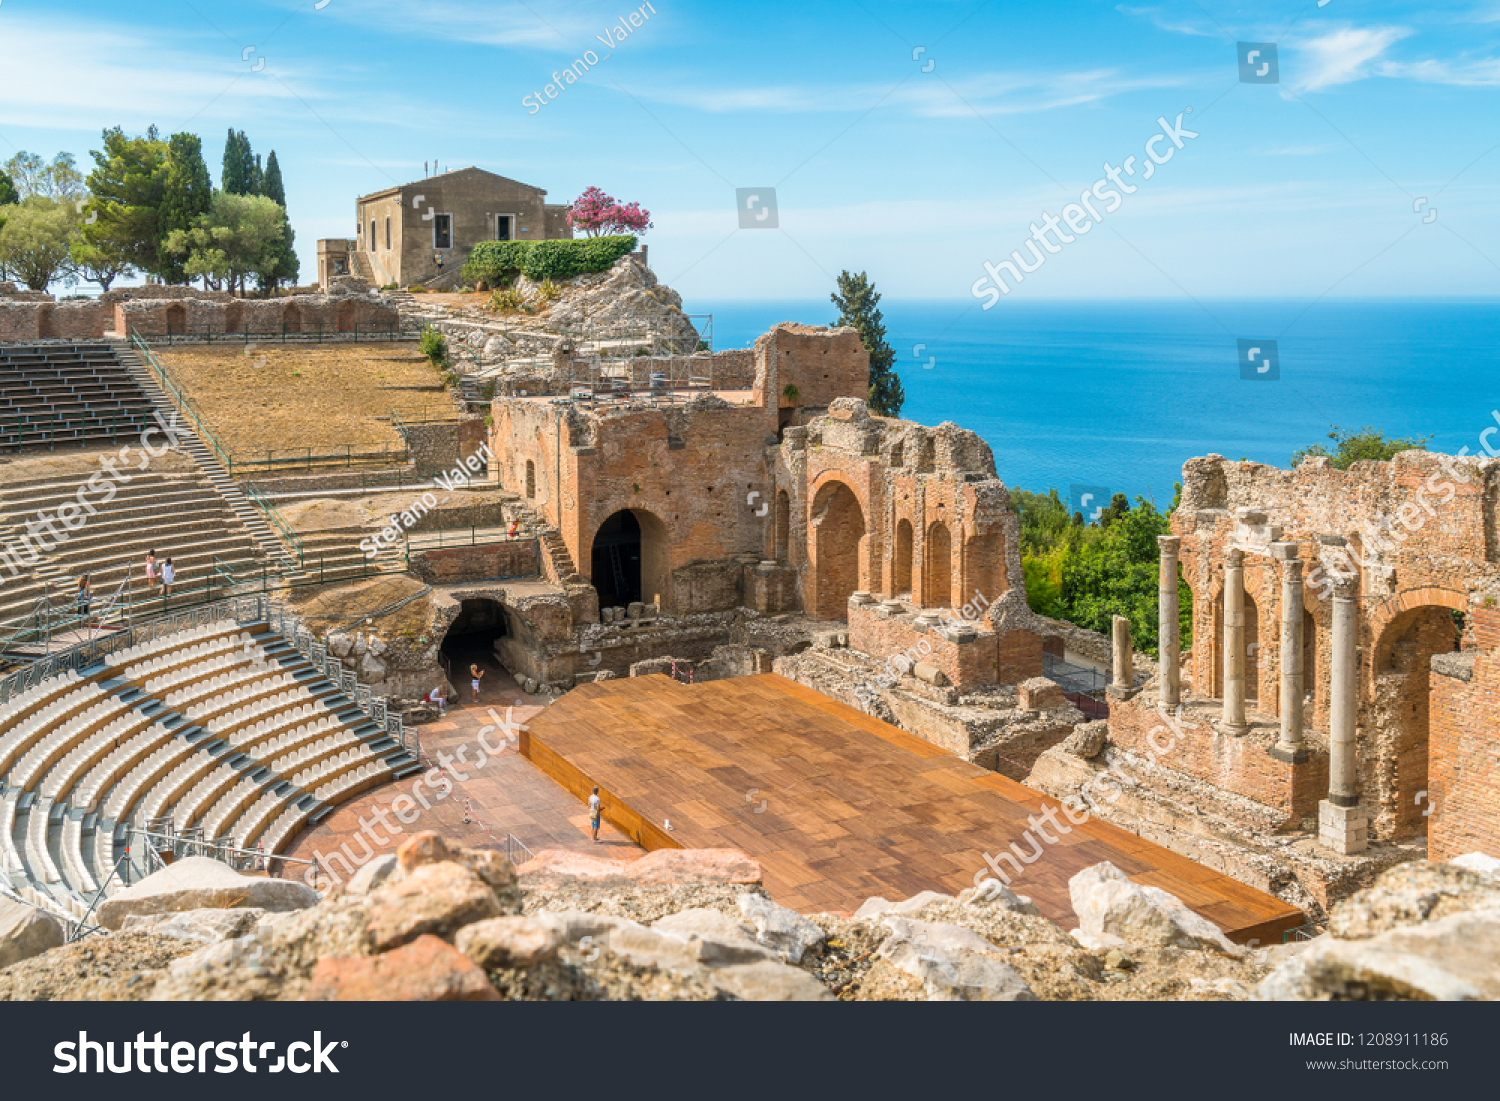 Ruins of the Ancient Greek Theater in Taormina on a sunny summer day with the mediterranean sea. Province of Messina, Sicily, southern Italy. #1208911186